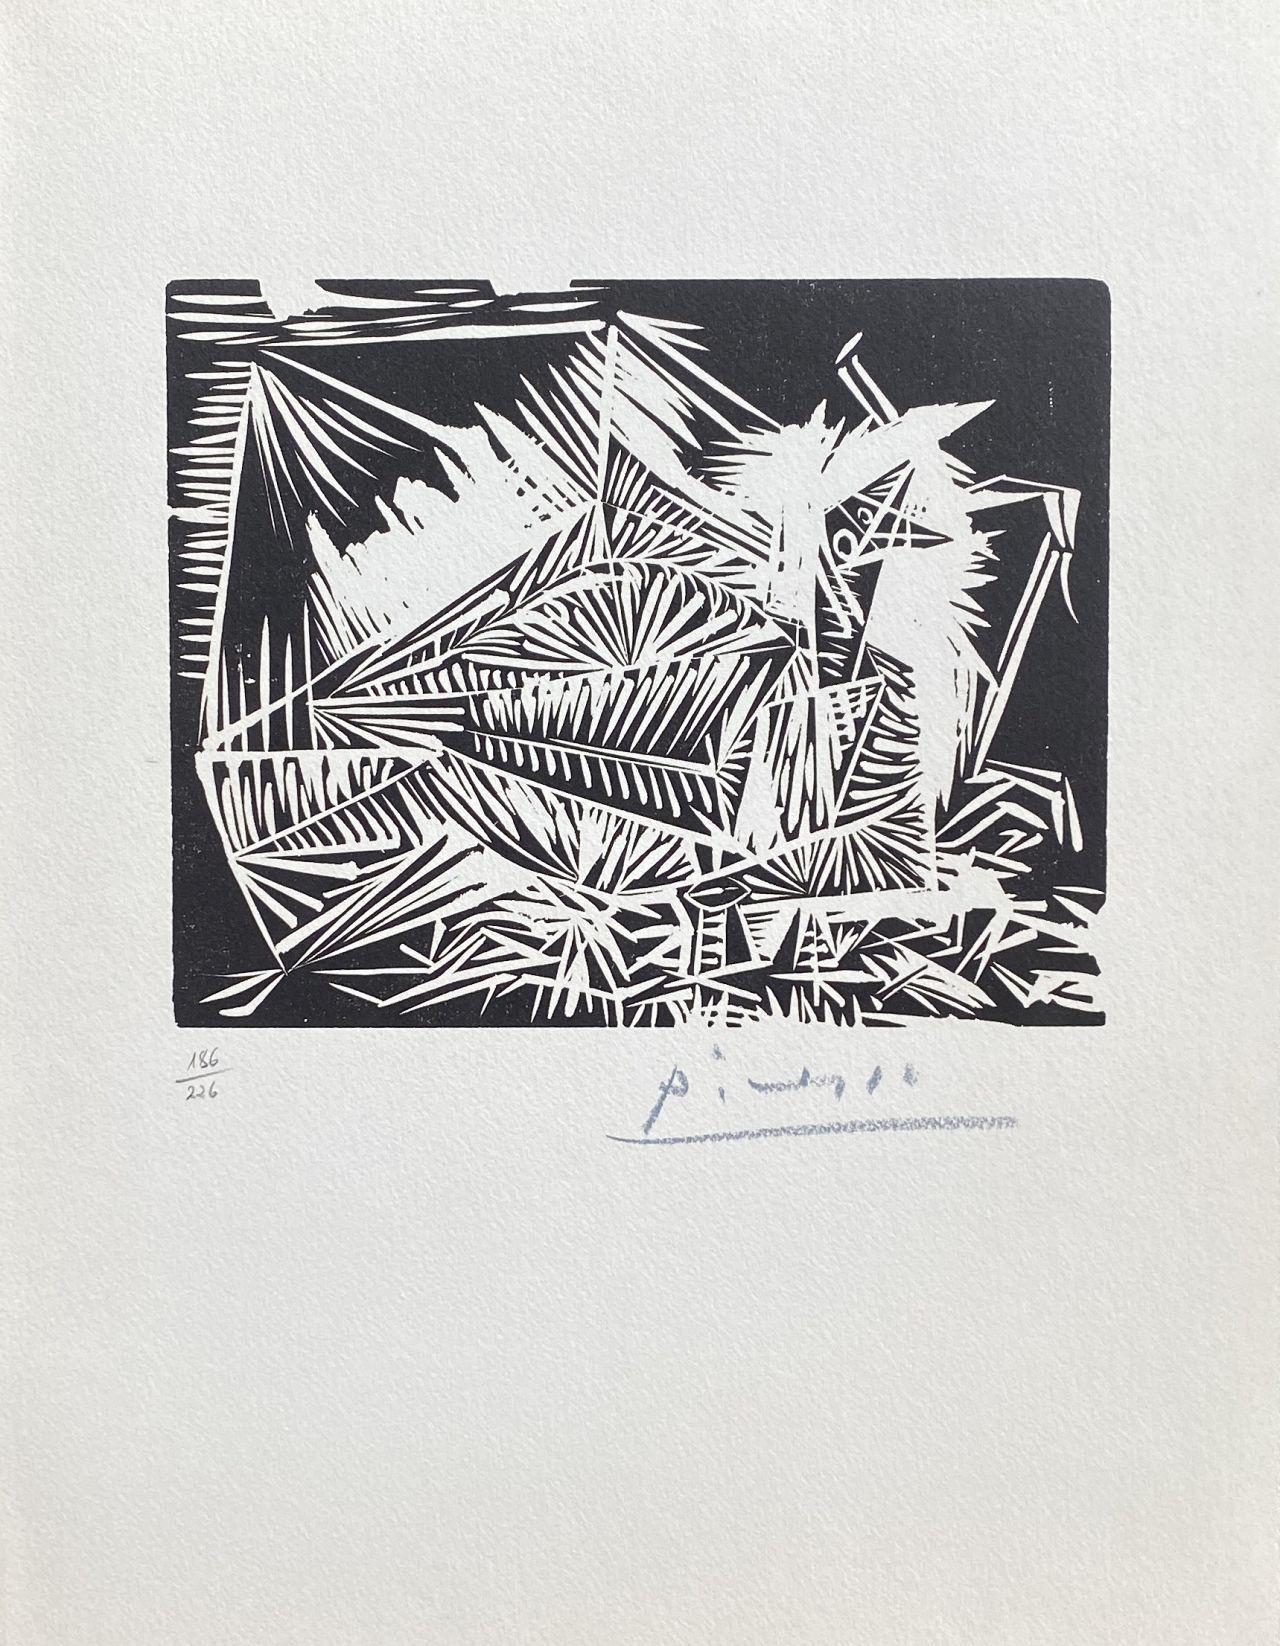 Pablo Picasso Animal Print - The Dove (Le Pigeonneau) - Original Linocut Hand Signed & Numbered (Bloch #326)